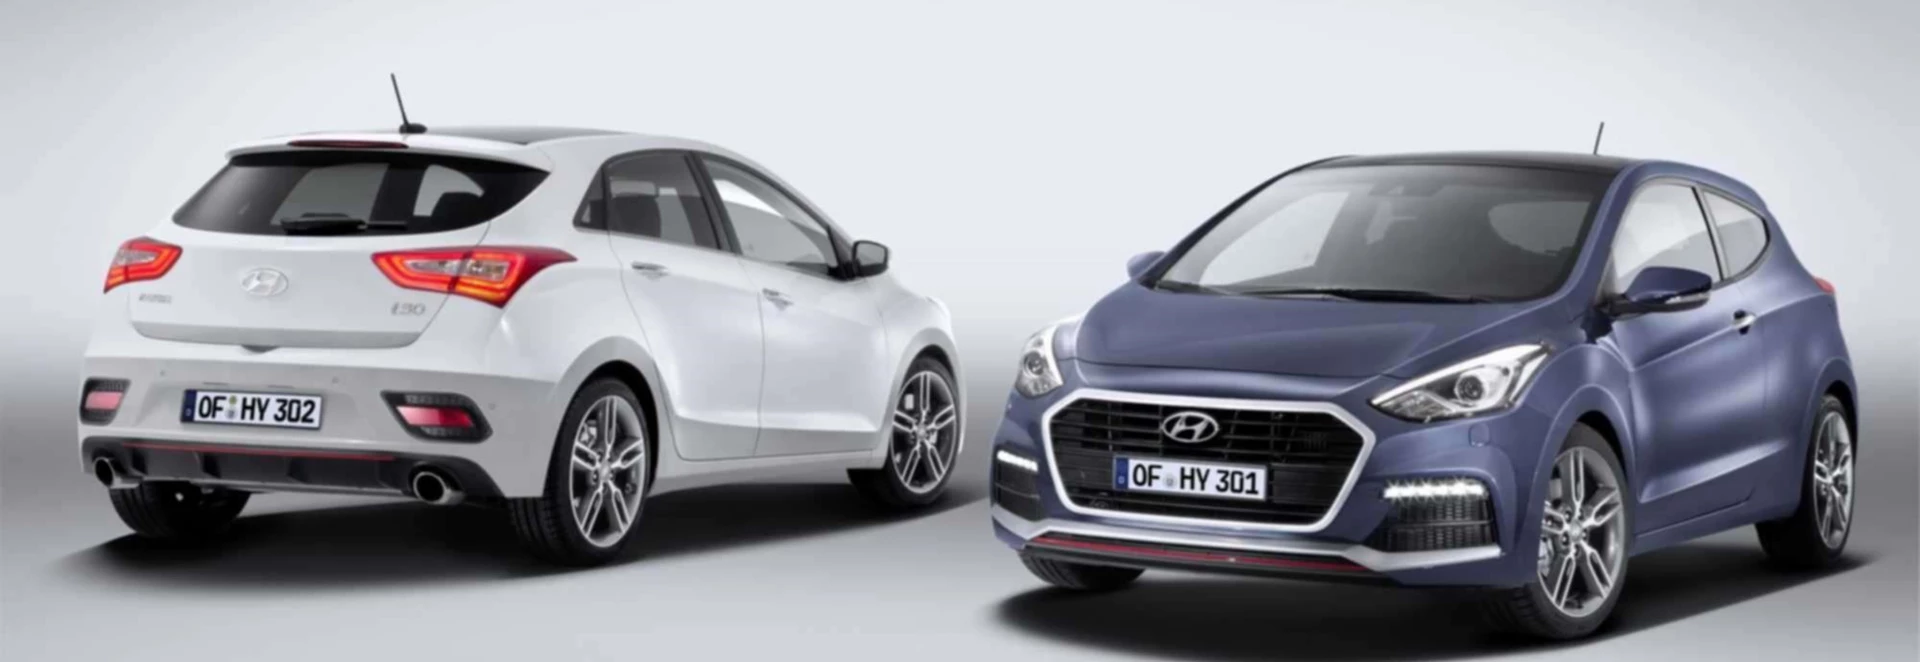 Updated Hyundai i30 pricing and specs announced 